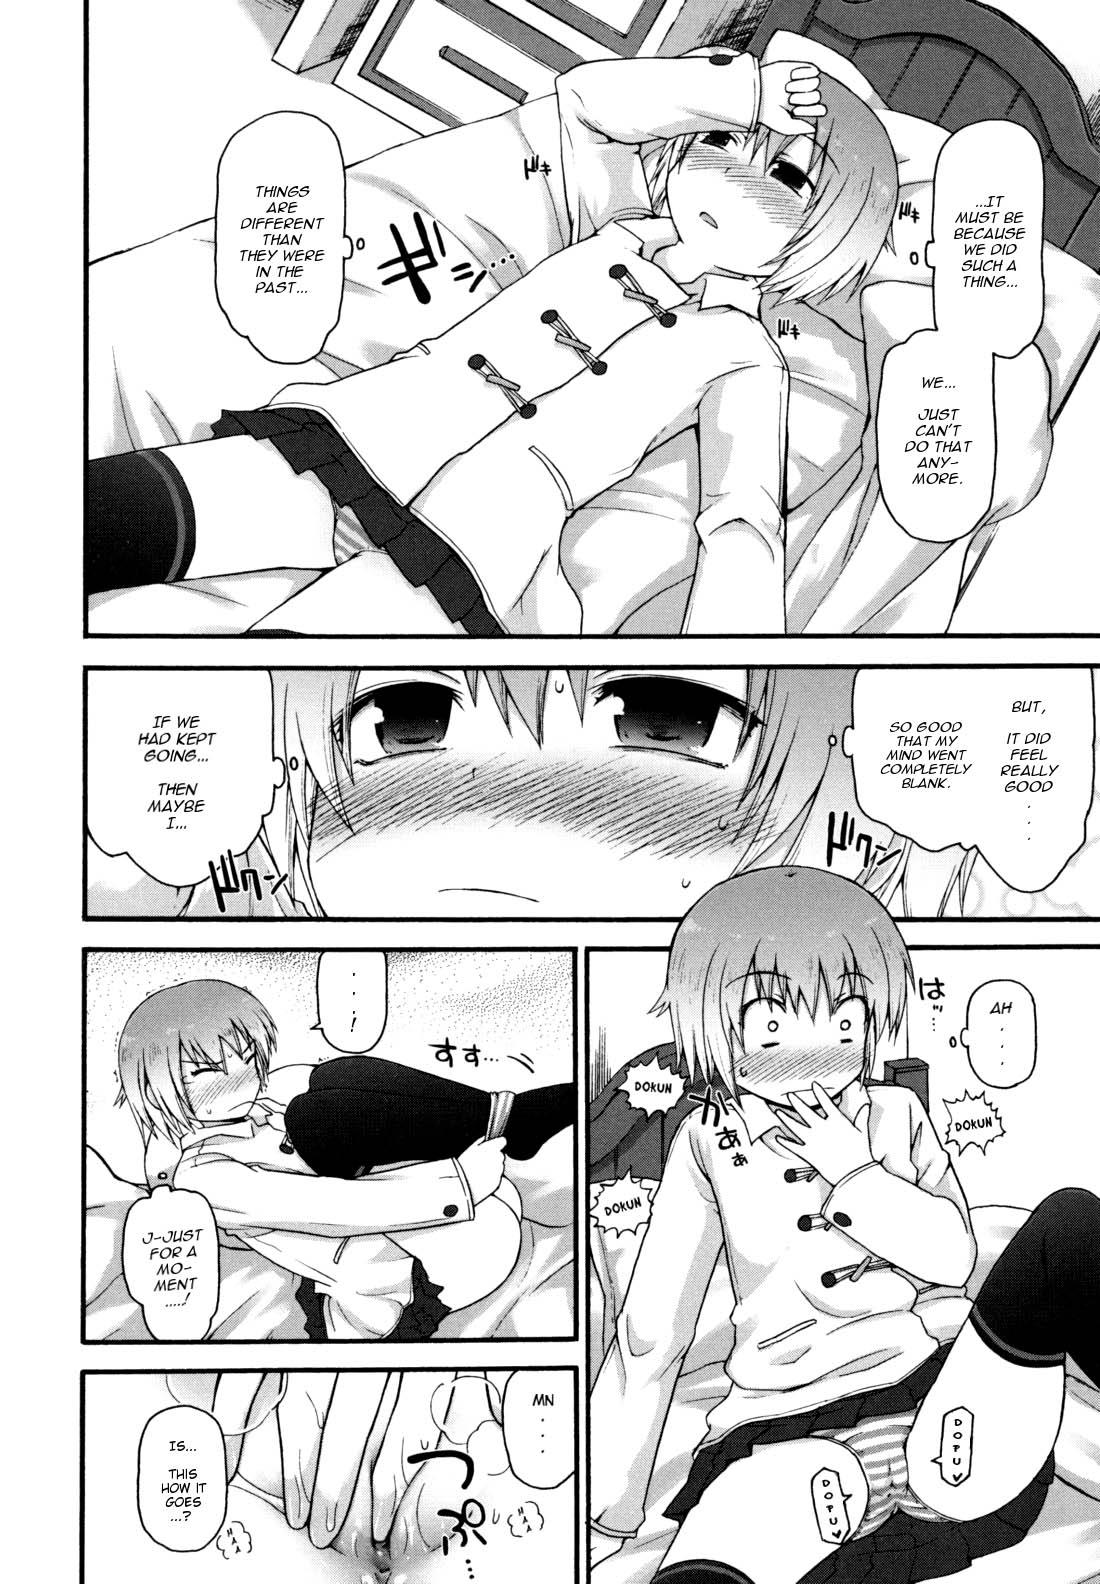 Cousin Onii-chan, I... Pervs - Page 8